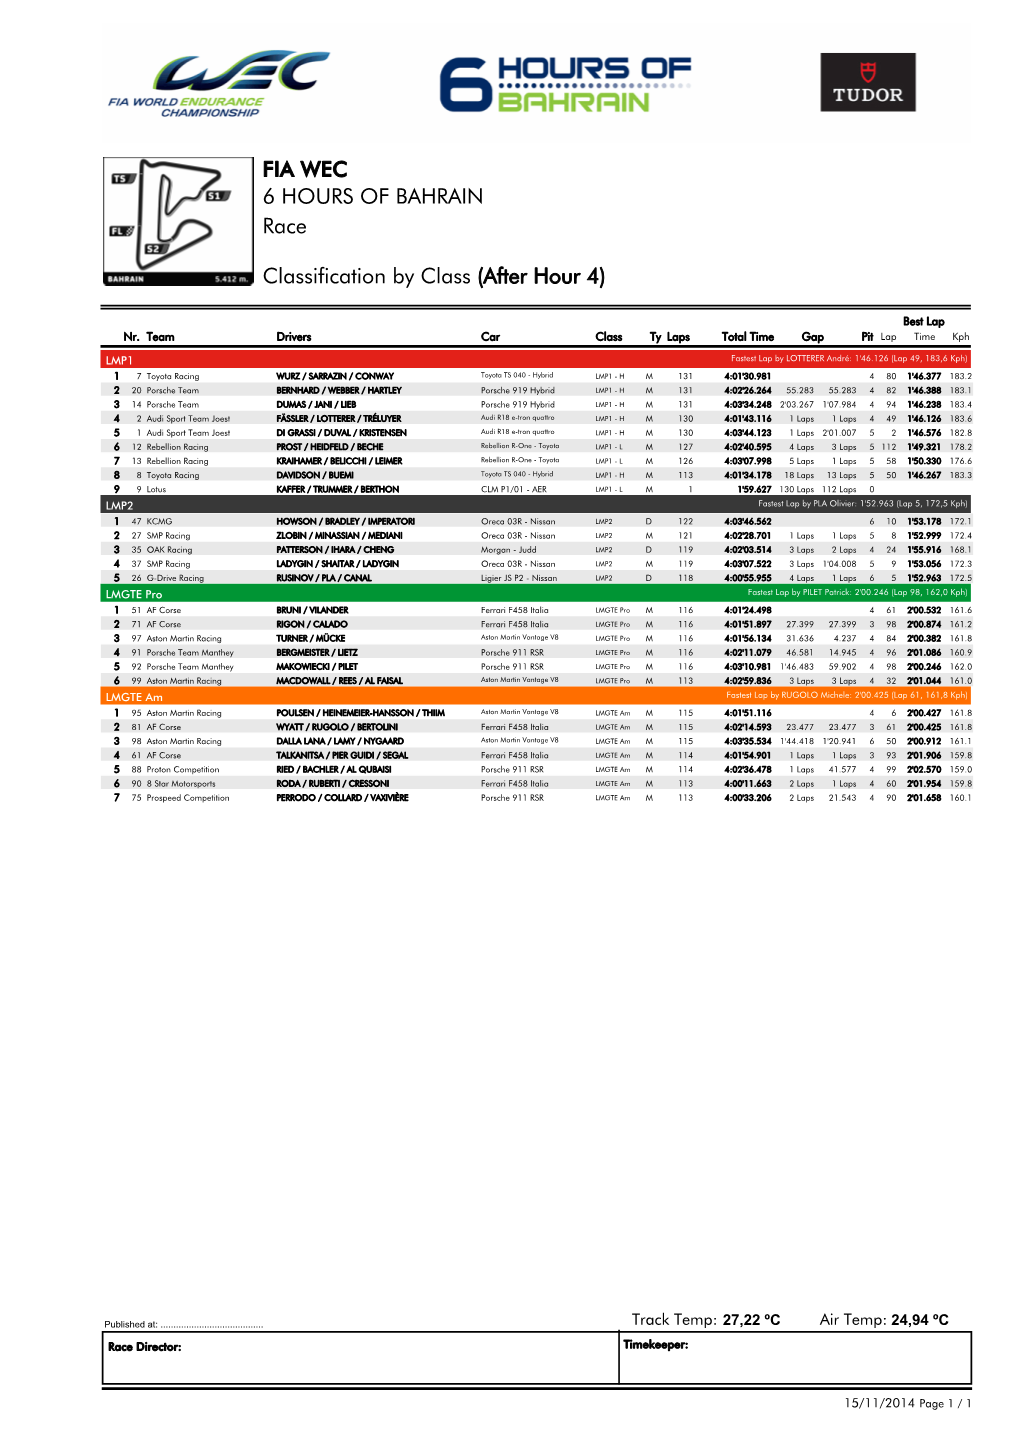 Race 6 HOURS of BAHRAIN FIA WEC Classification by Class (After